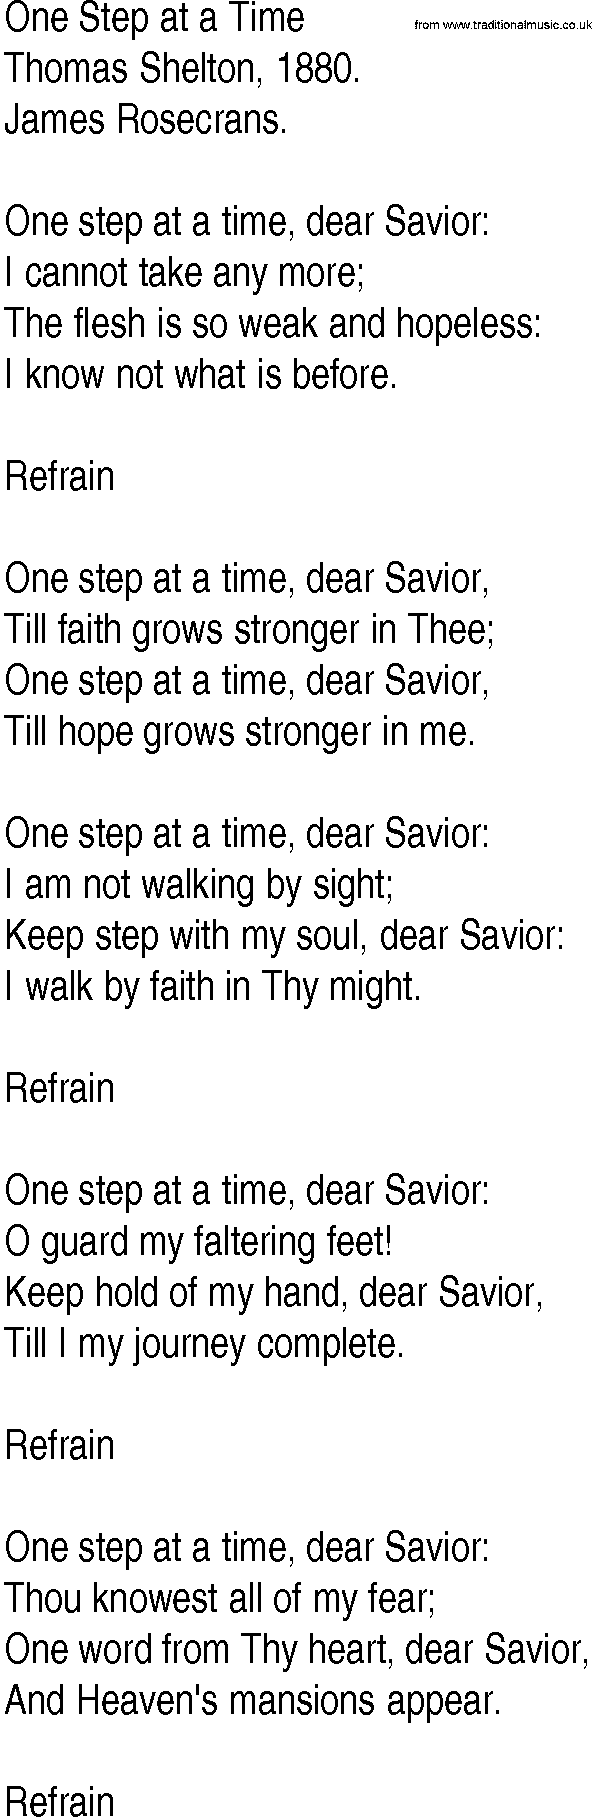 Hymn and Gospel Song: One Step at a Time by Thomas Shelton lyrics